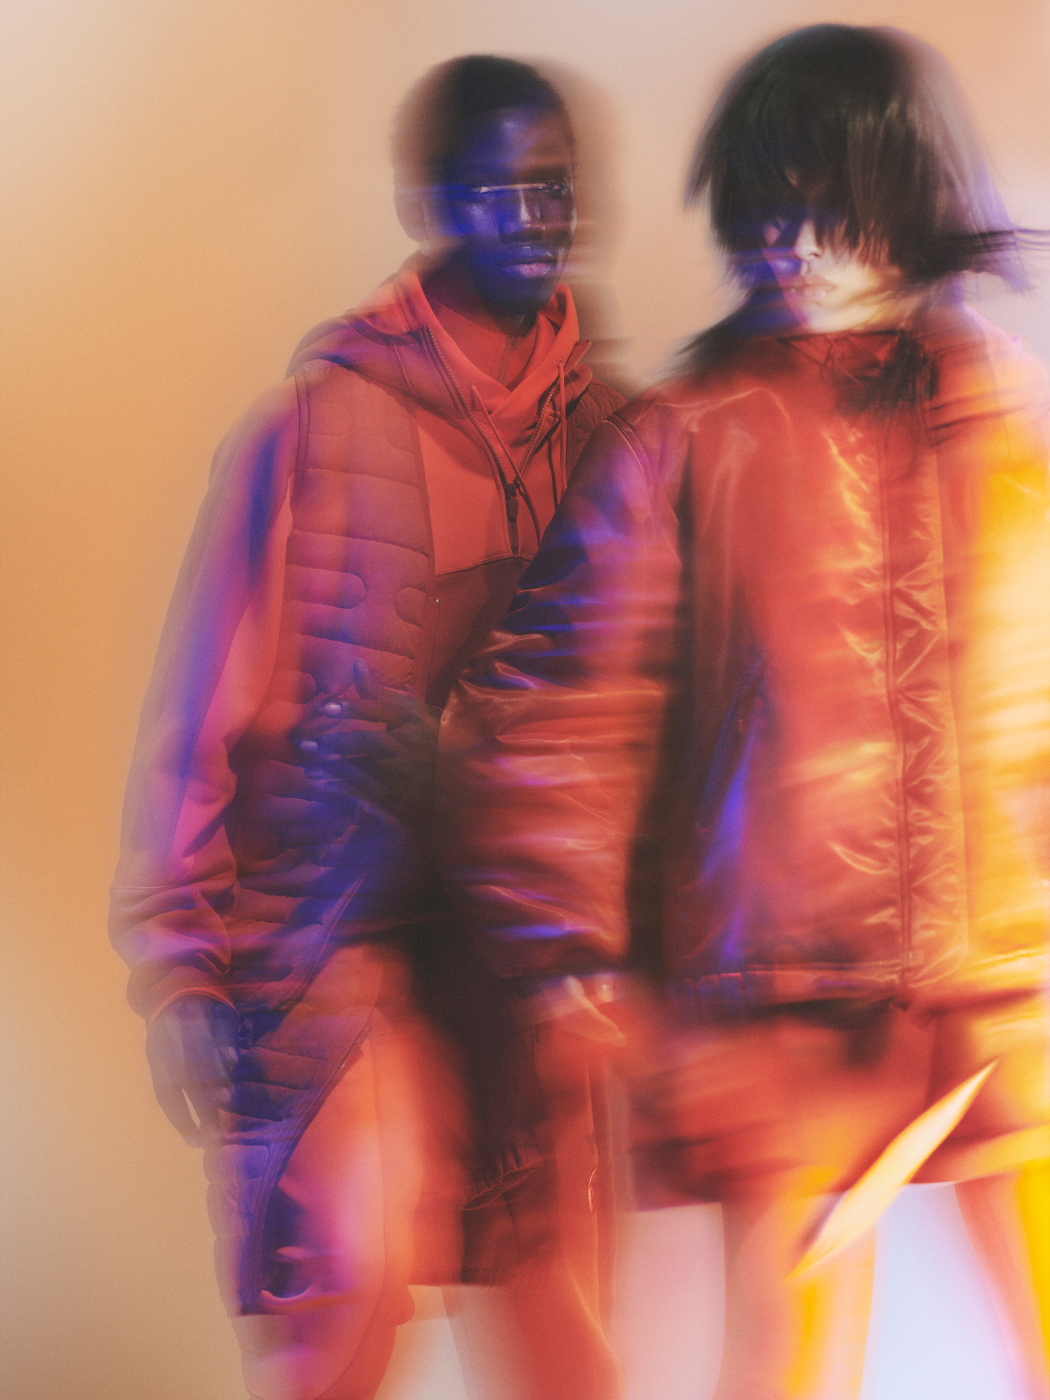 Two people wearing bright orange Y-3 jackets and hoodies look stern while gazing into the camera in front of a pale orange backdrop.